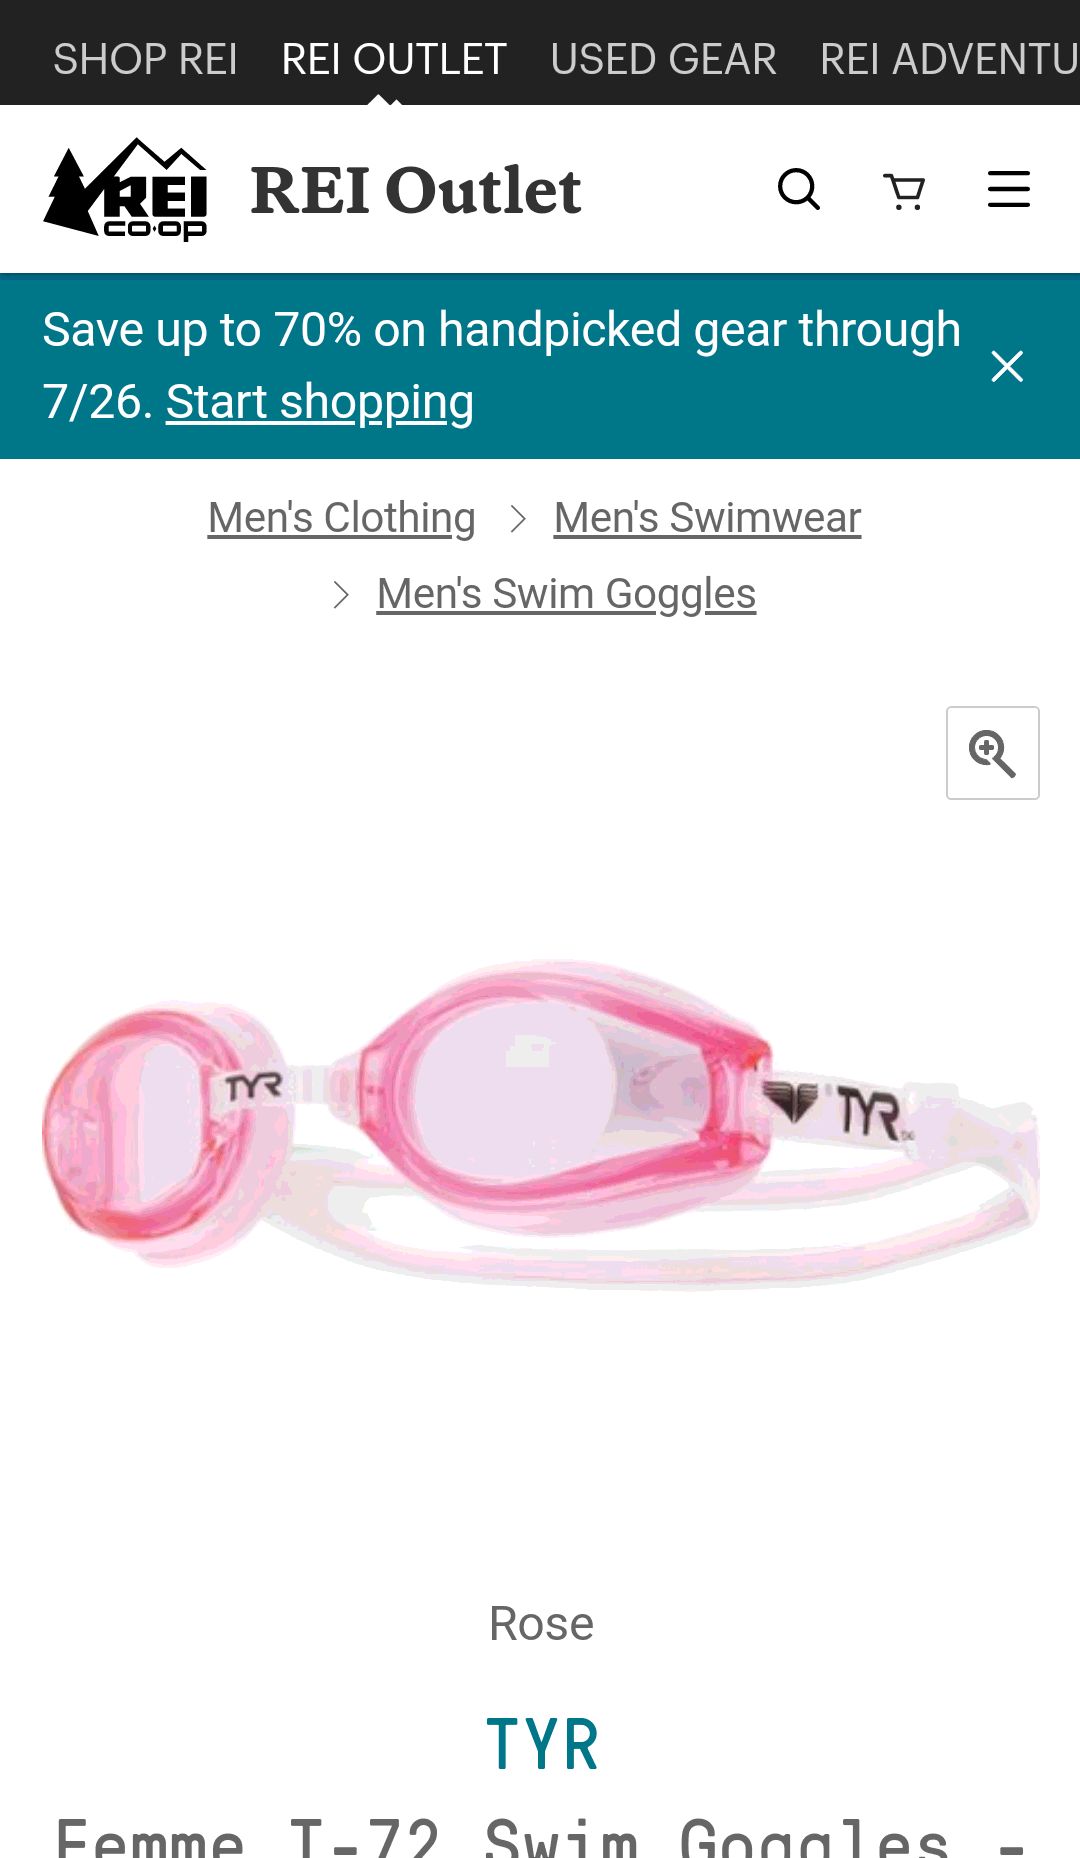 TYR 女性游泳镜 Femme T-72 Swim Goggles - Petite | REI Outlet